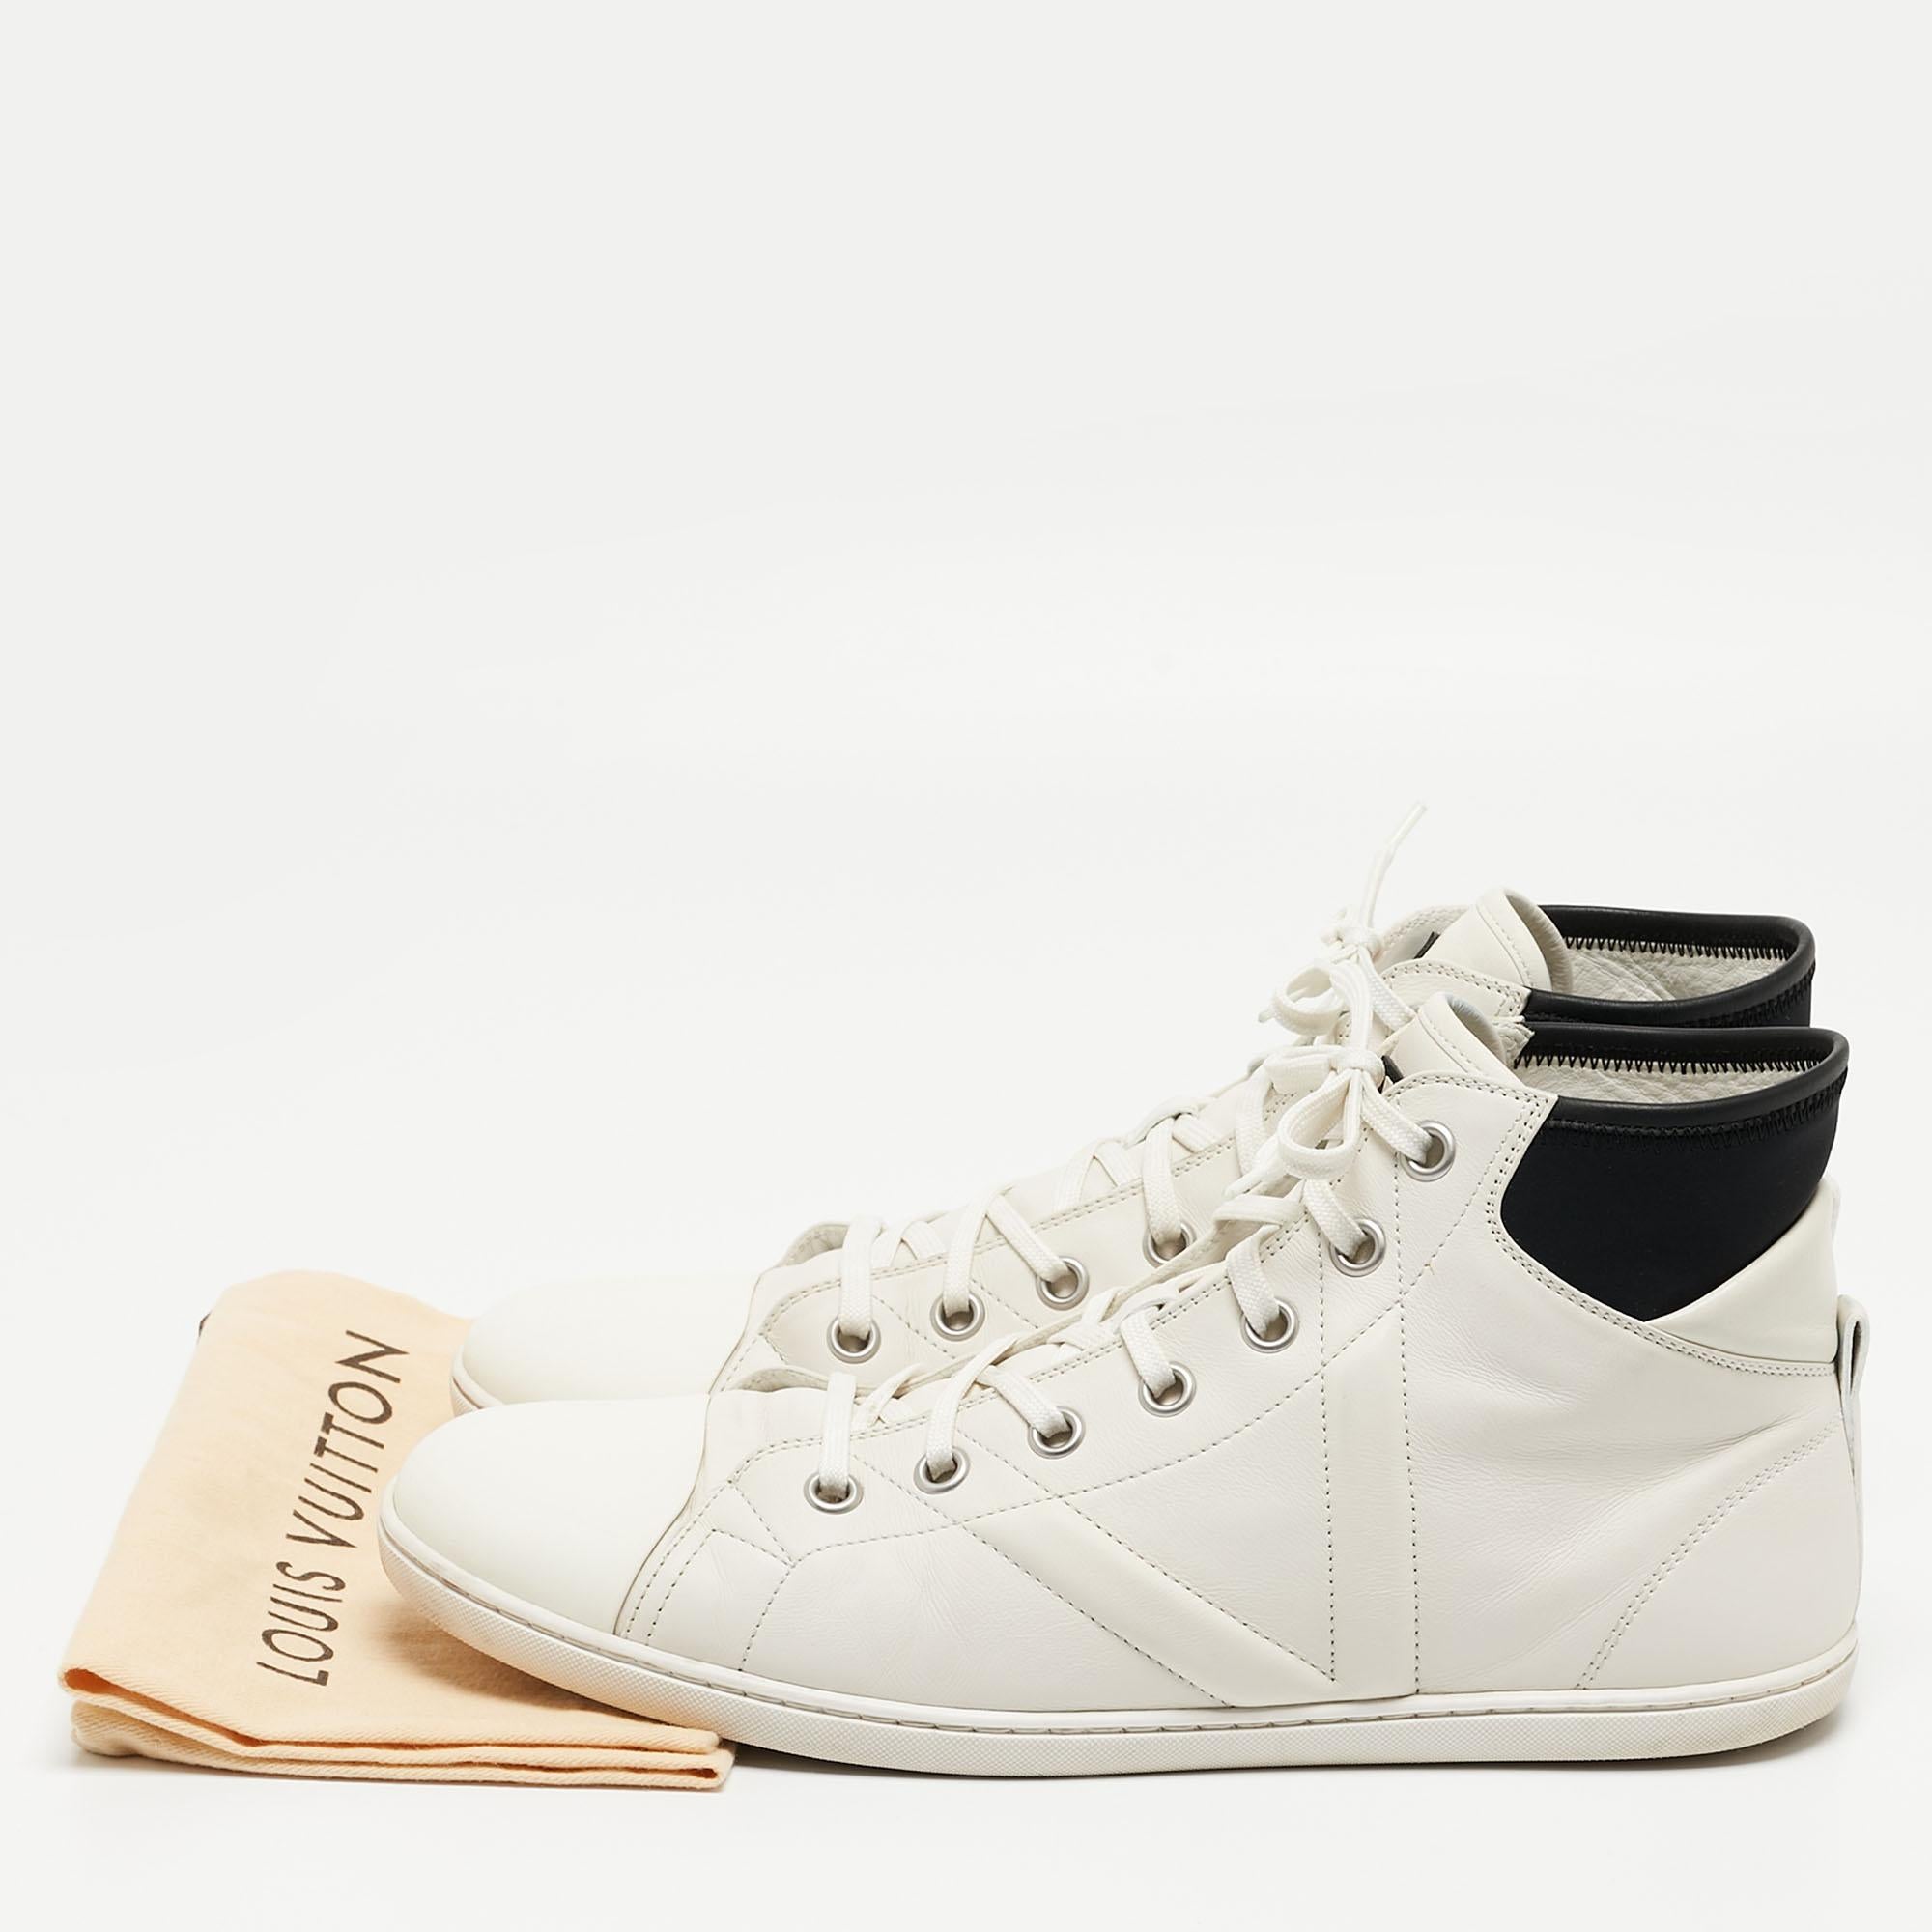 Louis Vuitton White/Black Leather Trainer High Top Sneakers Size 42.5 For Sale 2